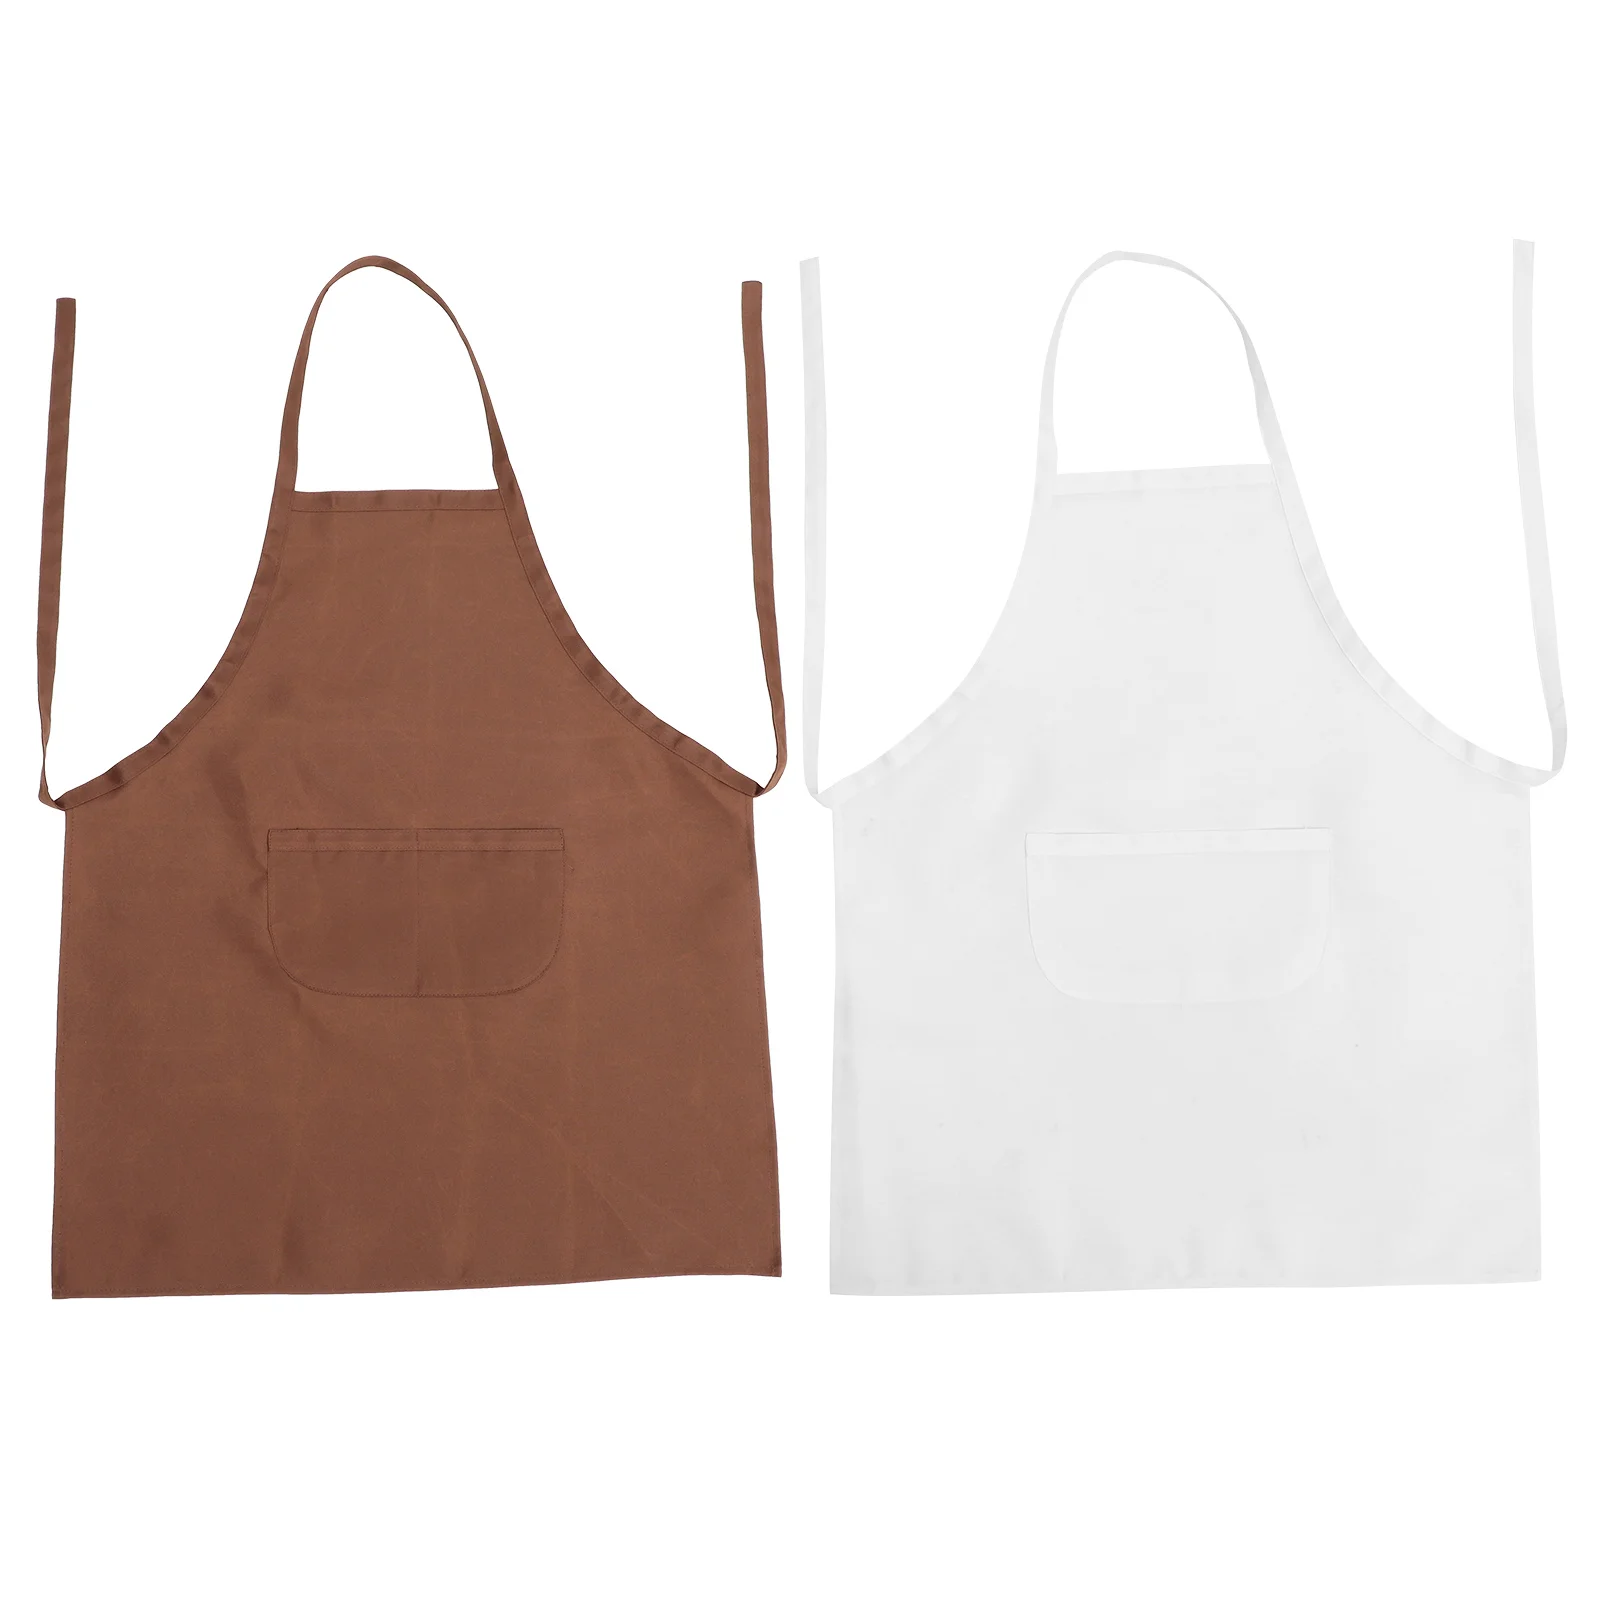 

2 Pcs Apron Women Cooking Bibs Multifunctional Chef Pocket Bakery Kitchen Washable Protector White Aprons Adults